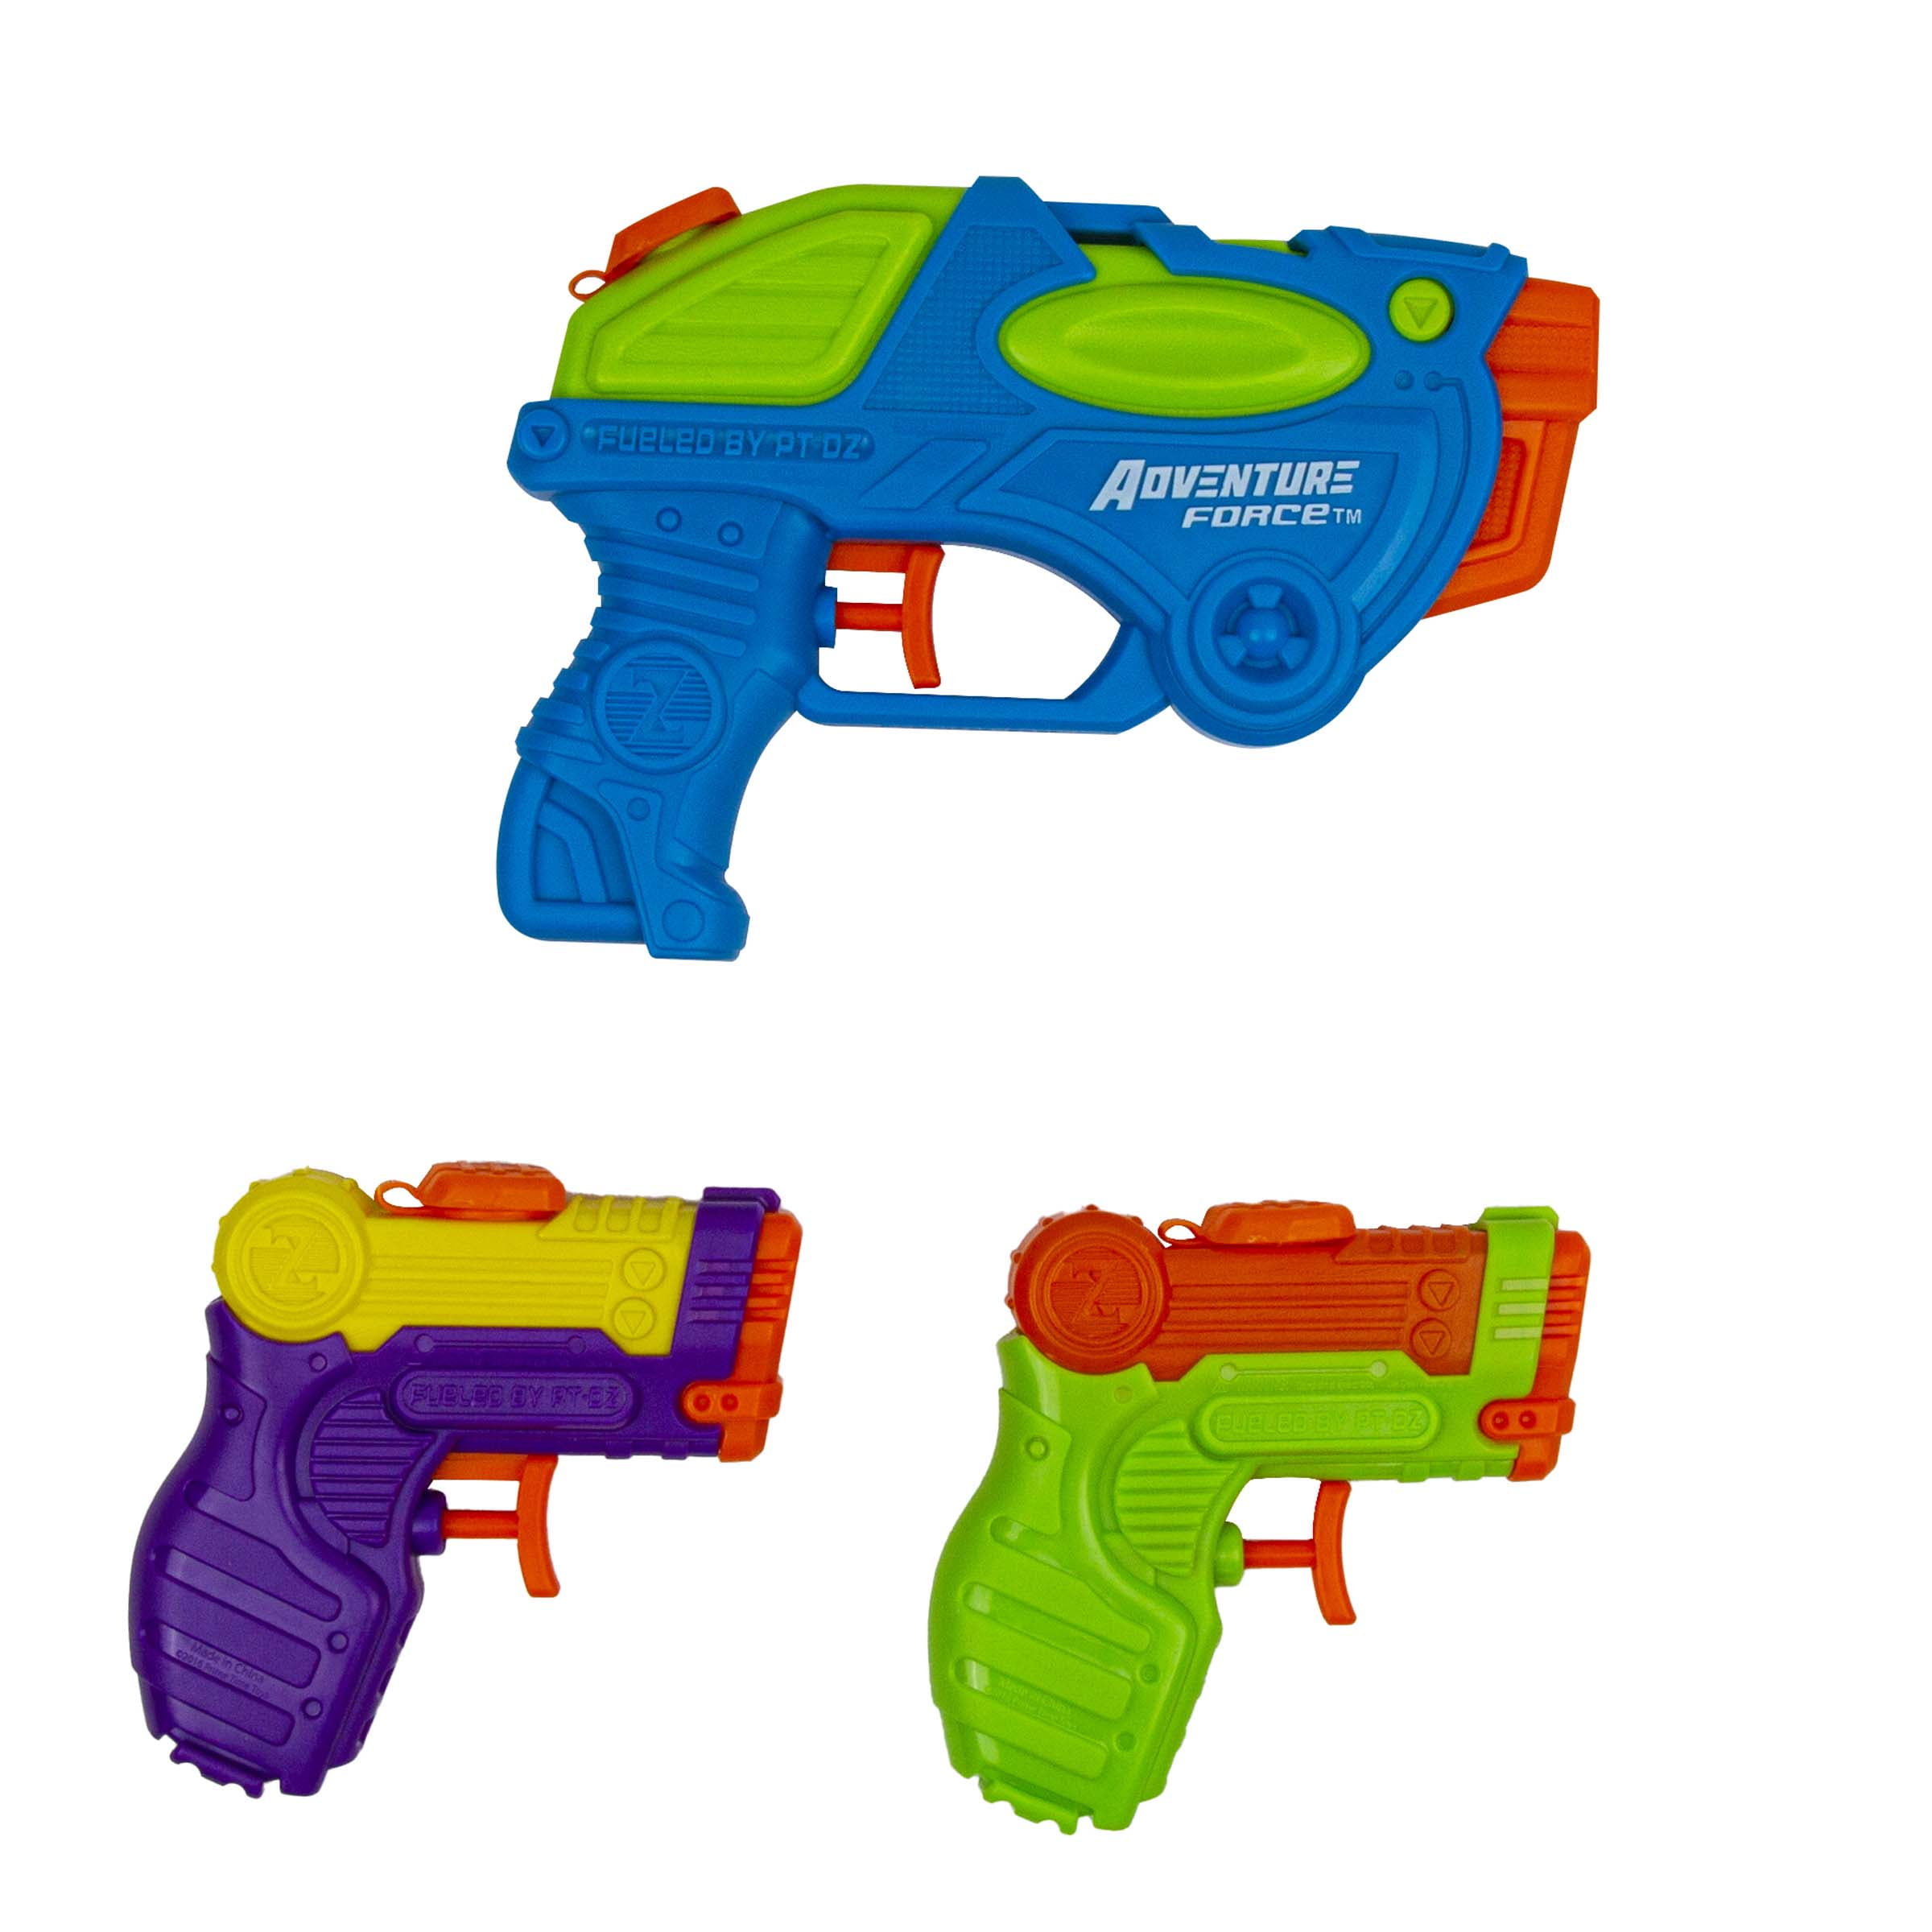 2x Thomas The Tank Engine Plastic Water Pistol For Kids Outdoor Party Game Toy 